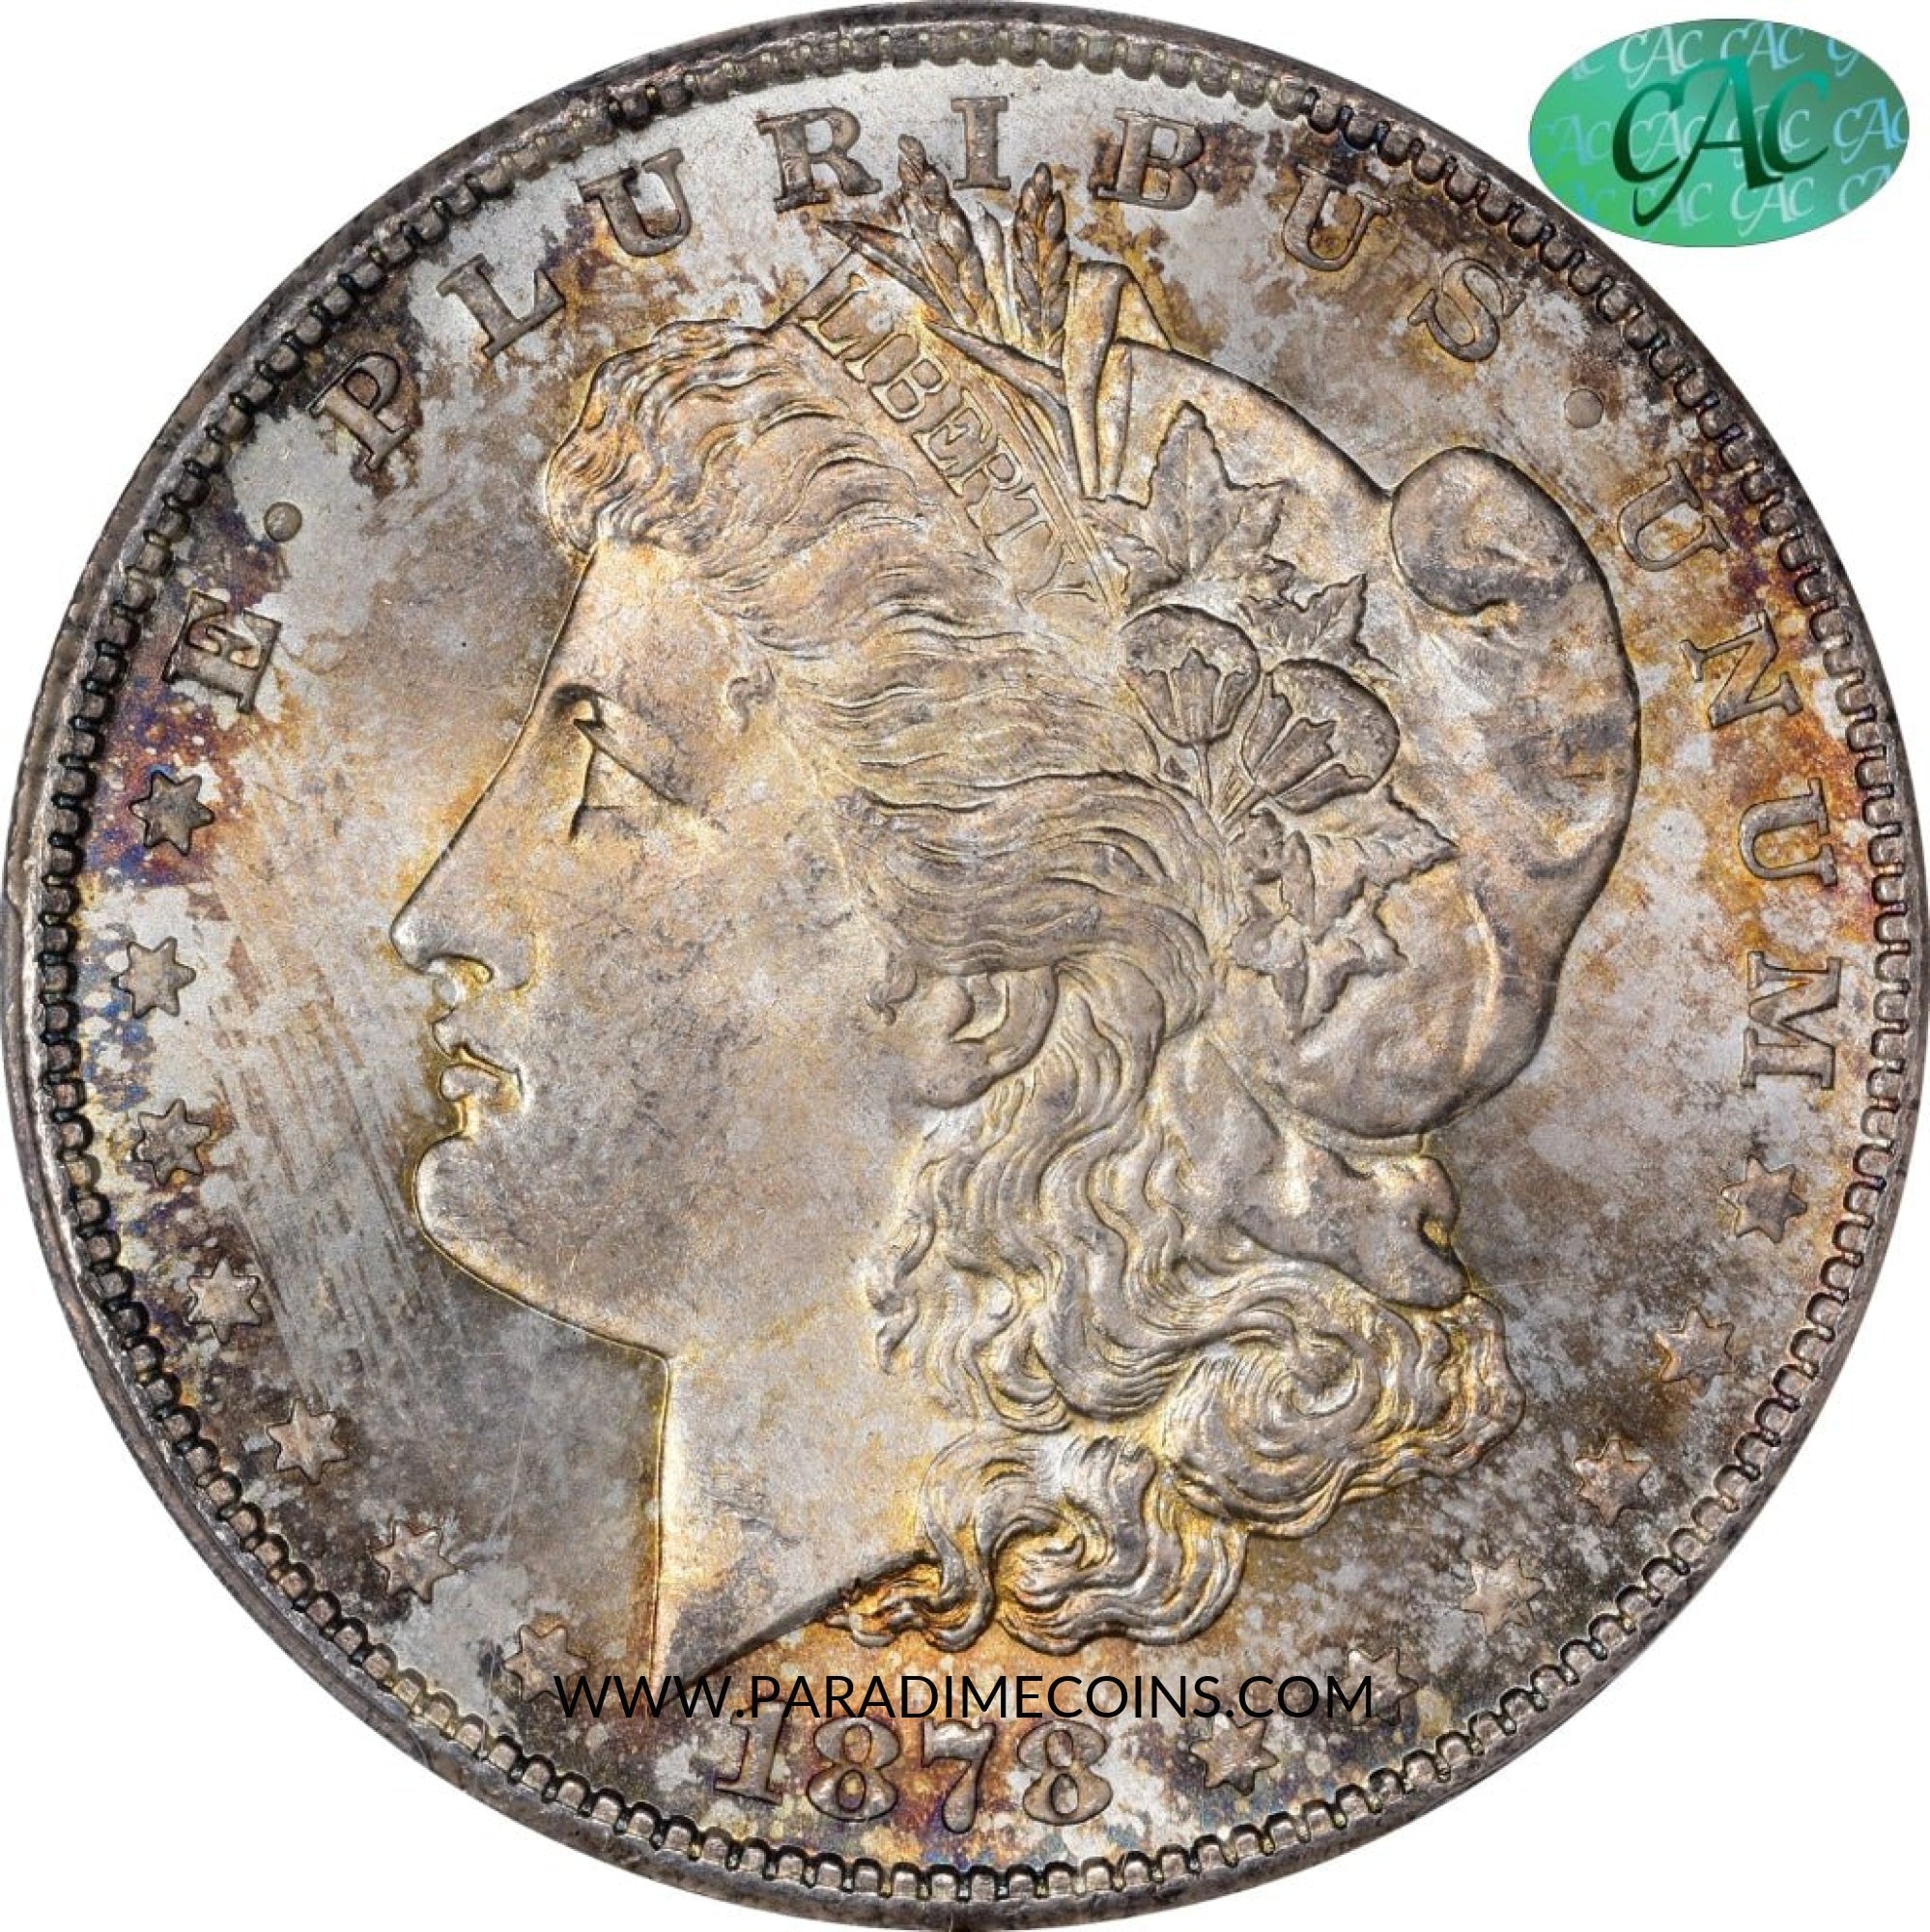 1878-S $1 MS65 PCGS CAC - Paradime Coins | PCGS NGC CACG CAC Rare US Numismatic Coins For Sale